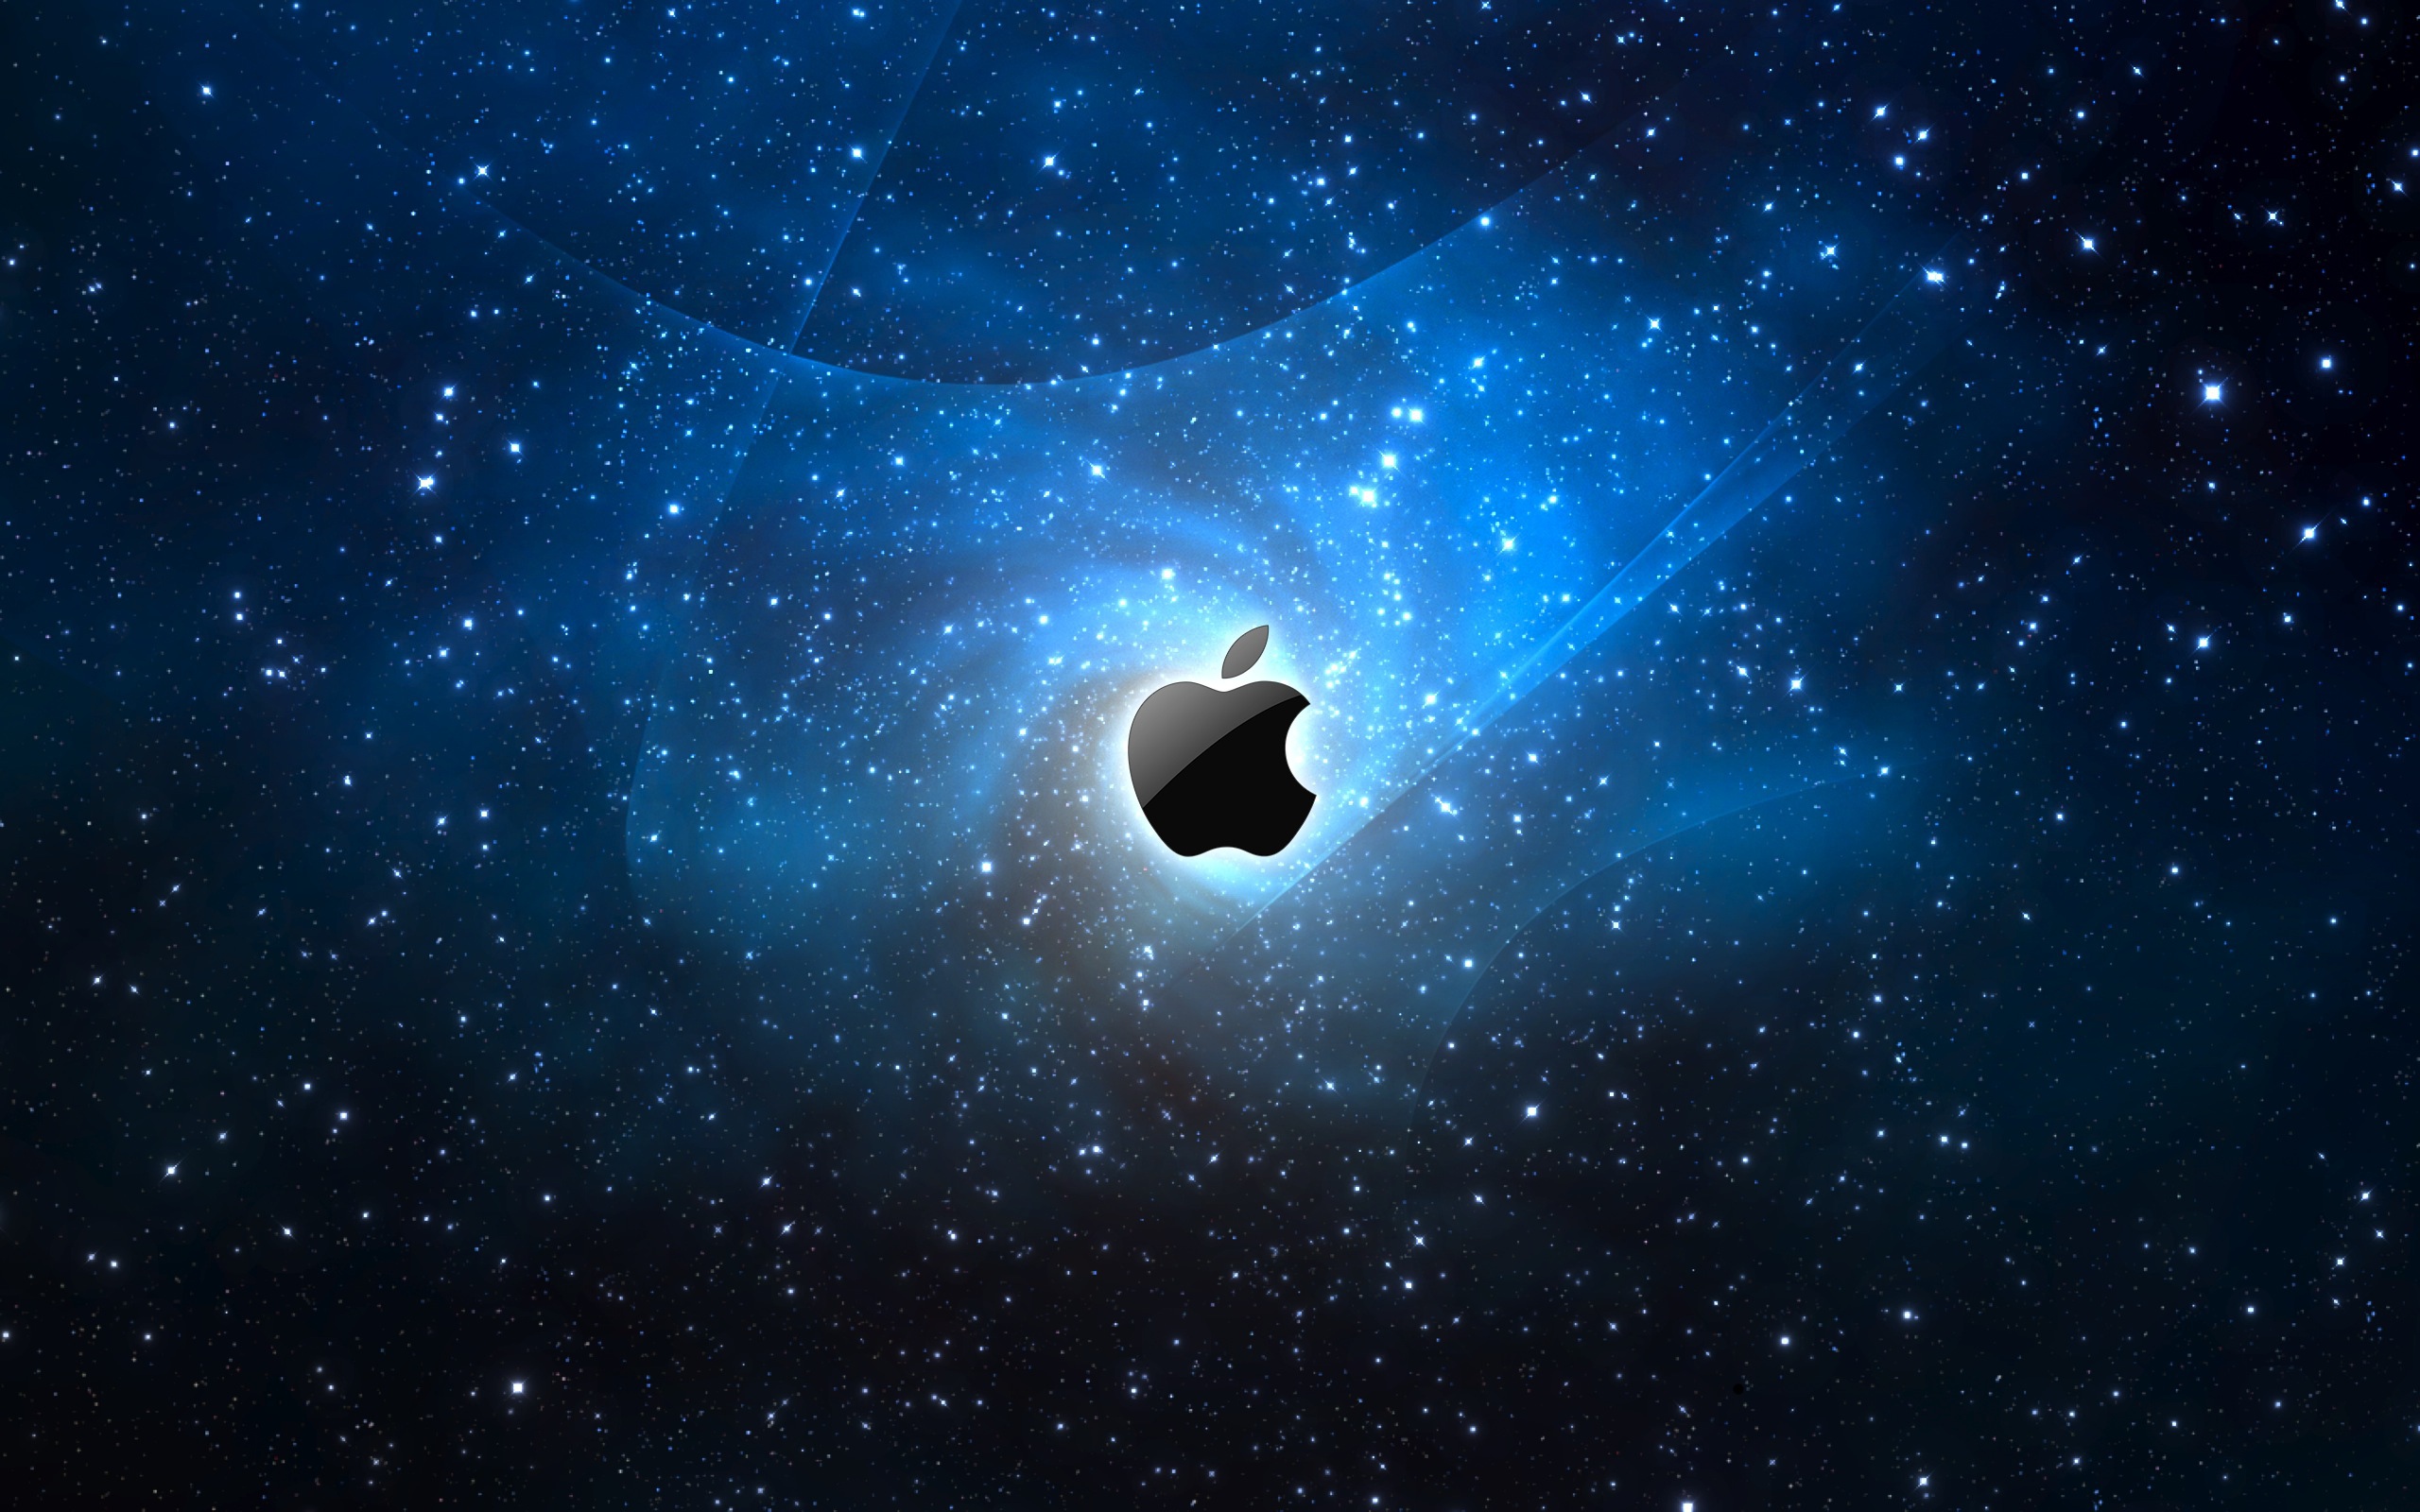 Apple Icon On Star Galaxy Background Desktop Wallpapers 2560x1600